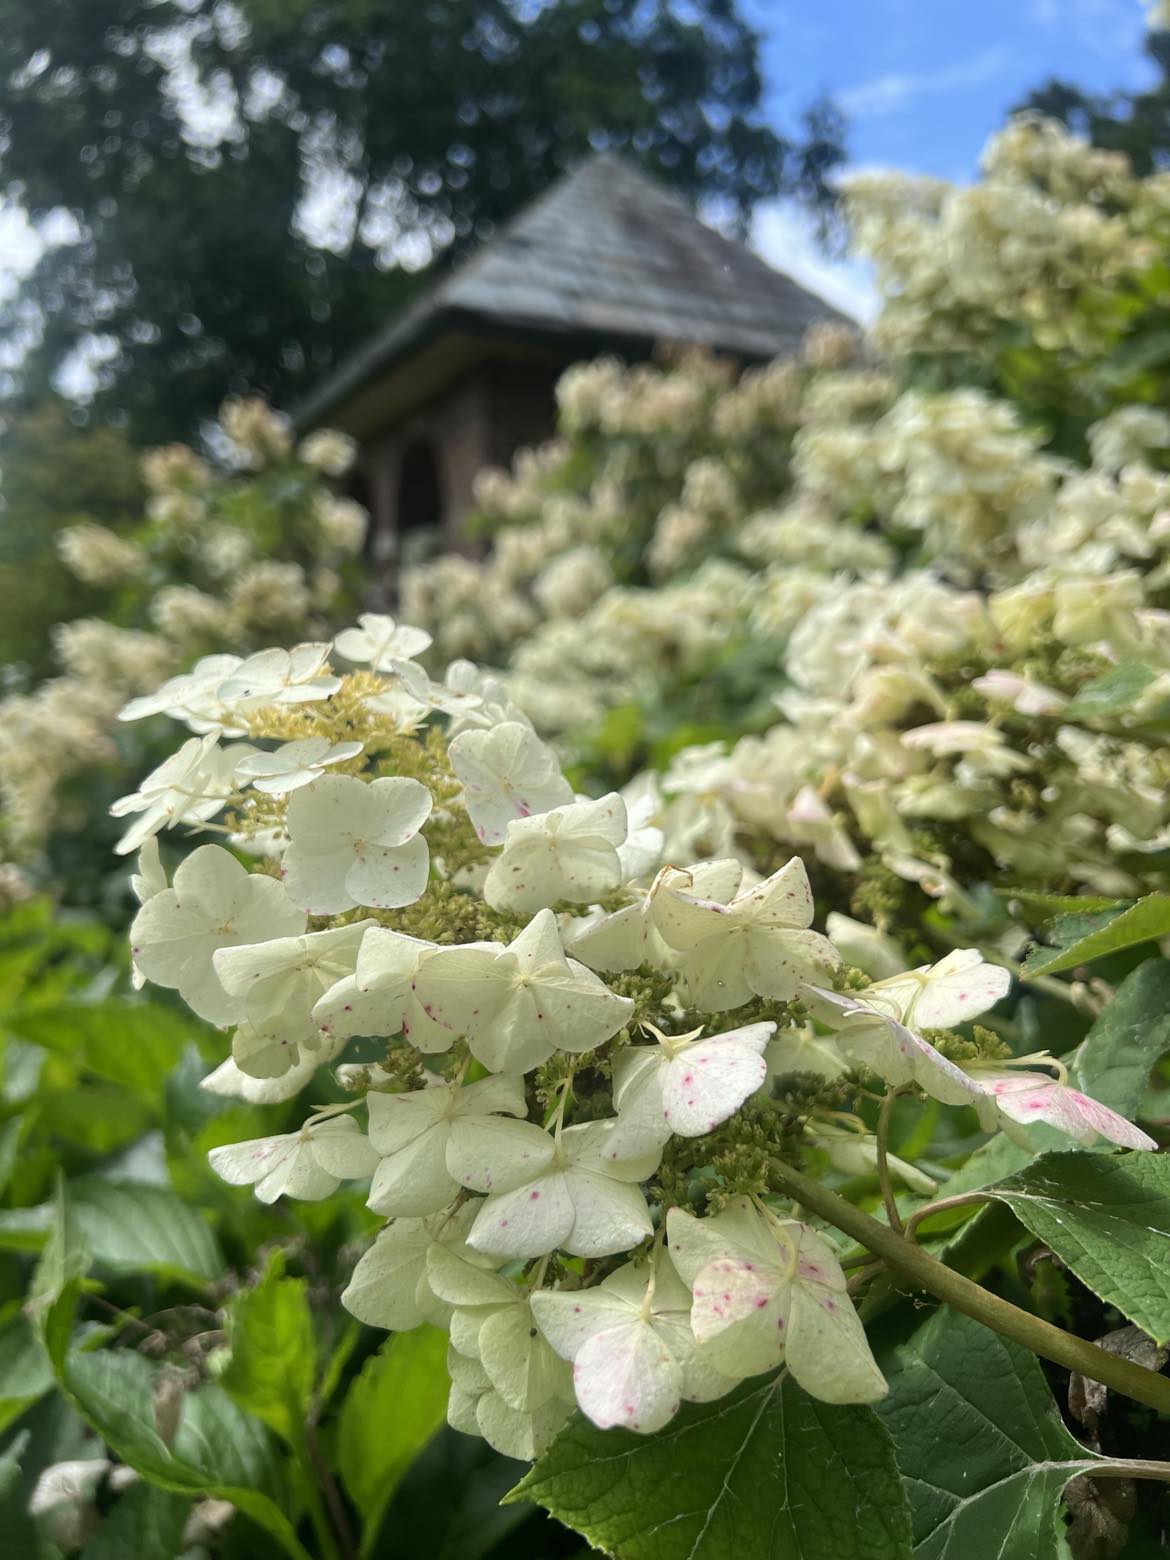 Close-up of a cluster of white hydrangea flowers with a blurred background of more flowers, green foliage, and a small brick structure with a peaked roof at the Applewood Estate, part of the Ruth Mott Foundation.